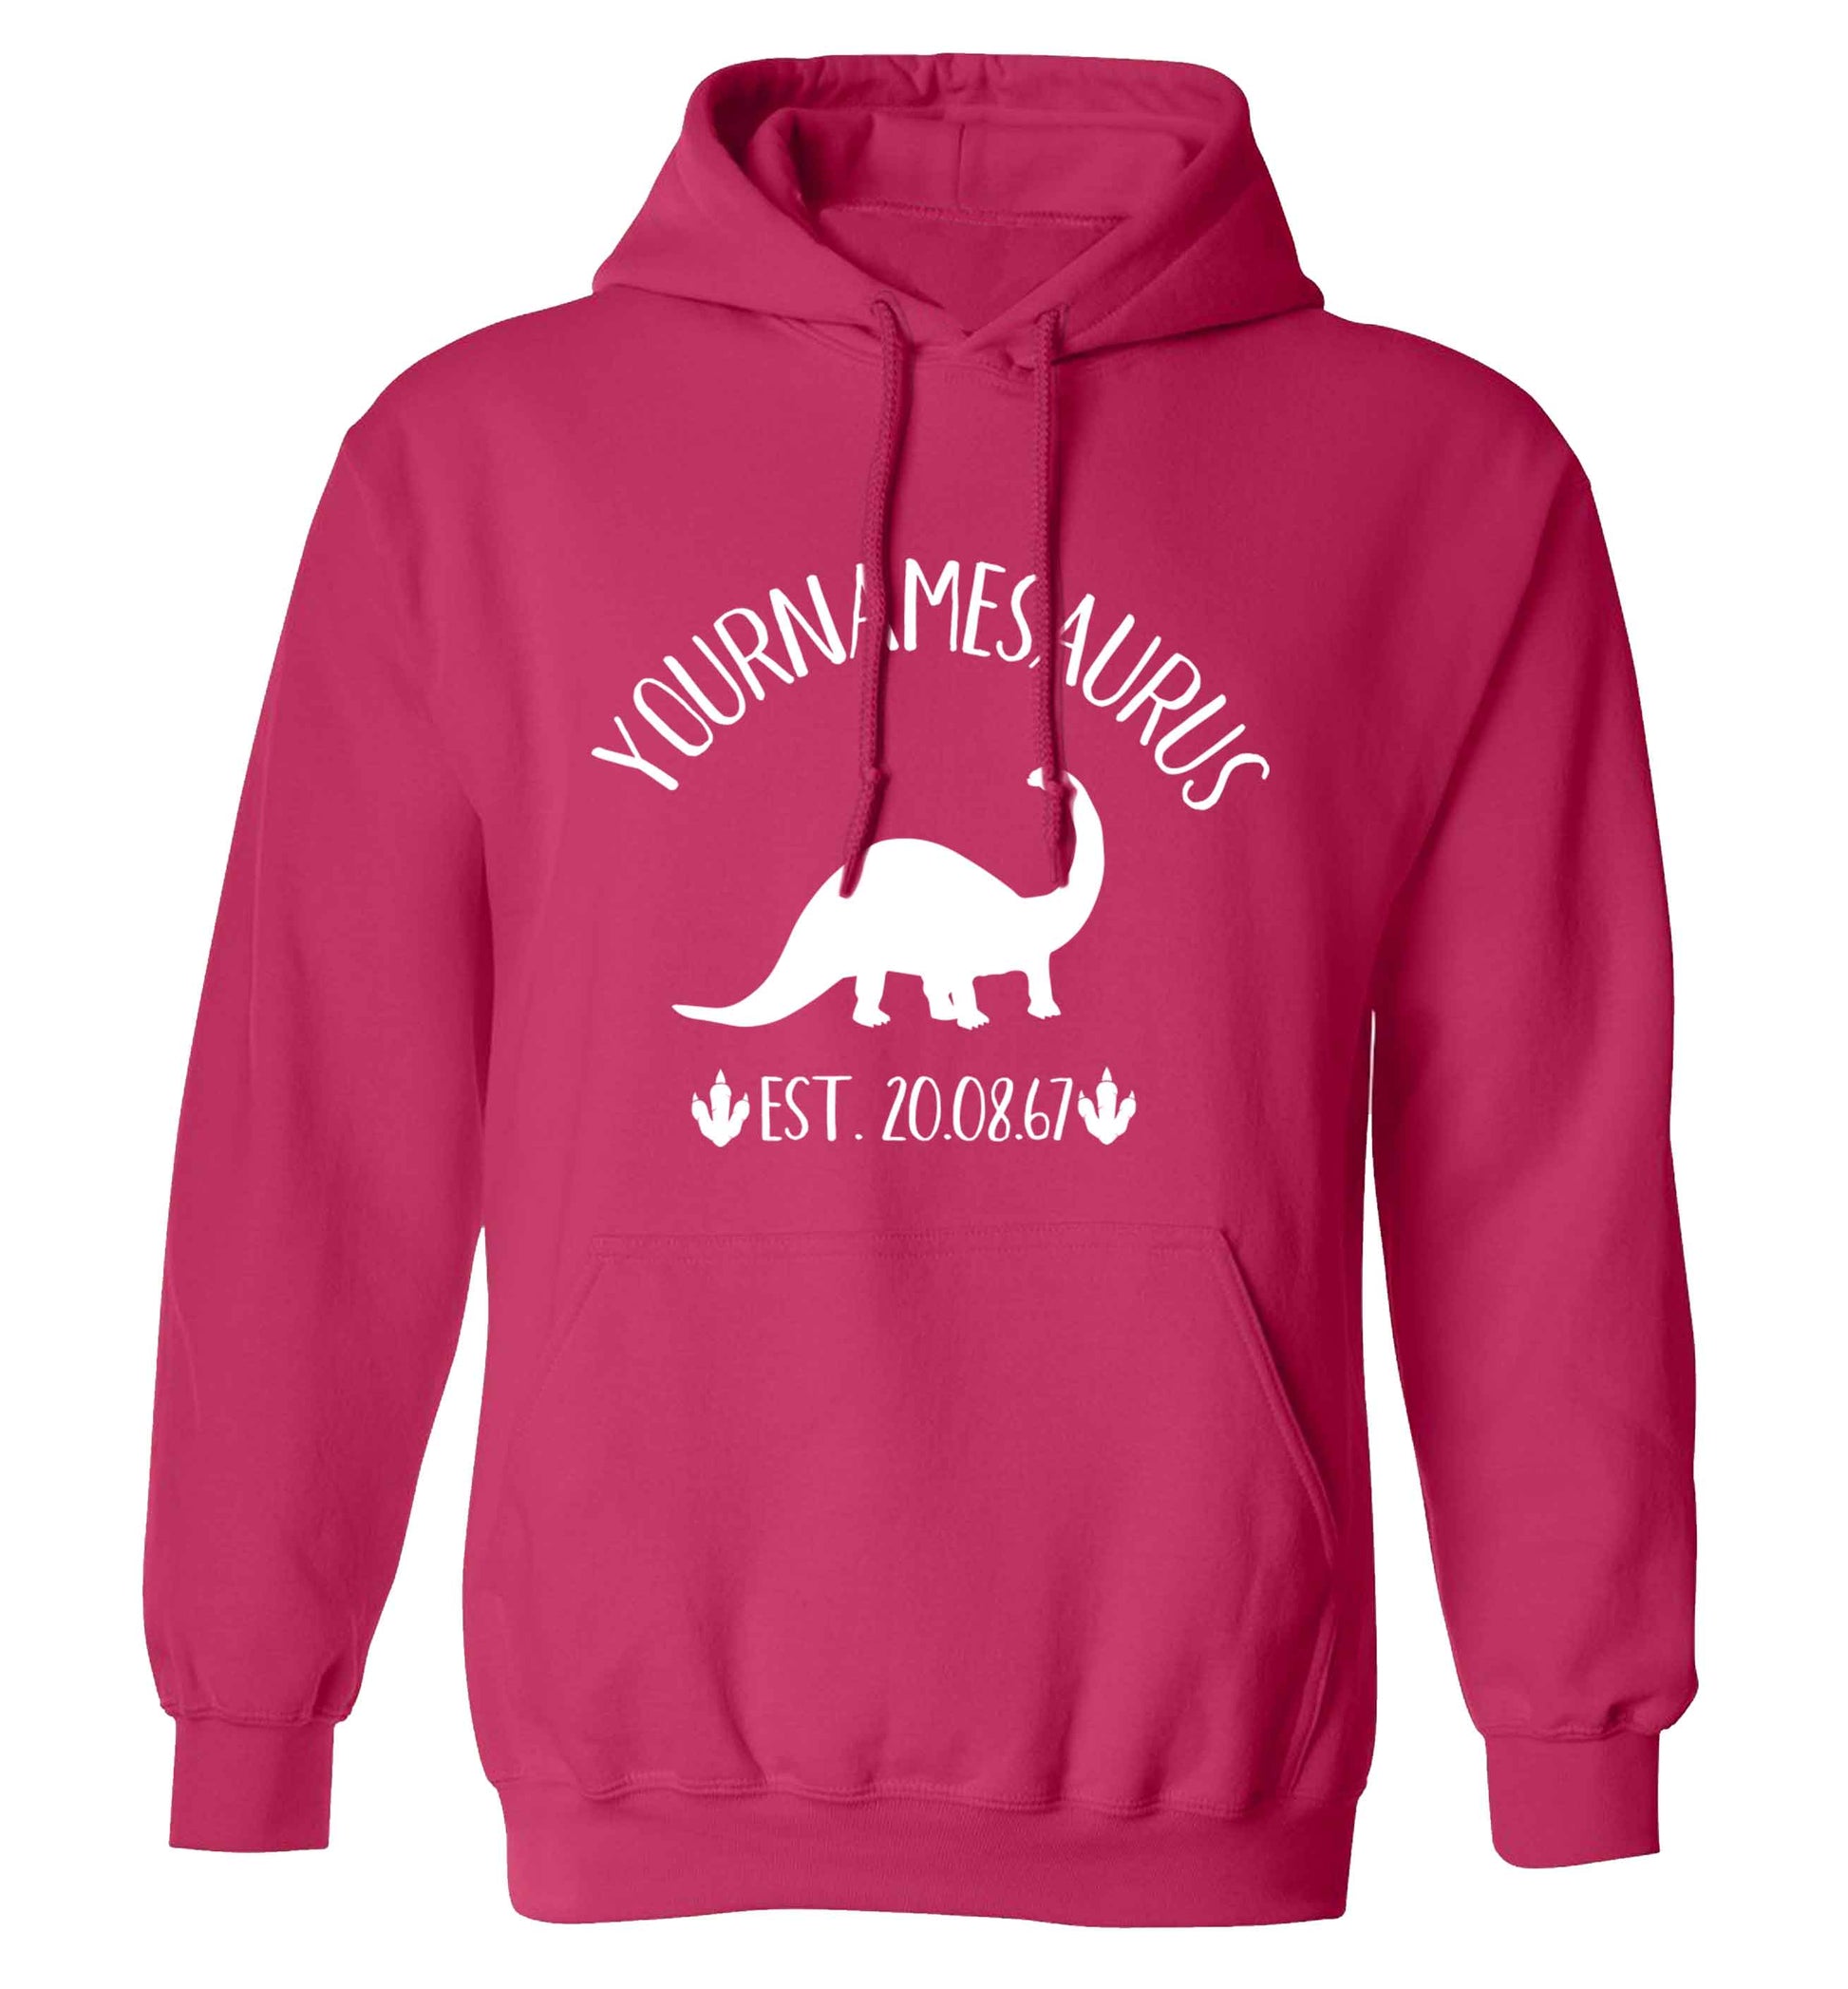 Personalised (your name) dinosaur birthday adults unisex pink hoodie 2XL